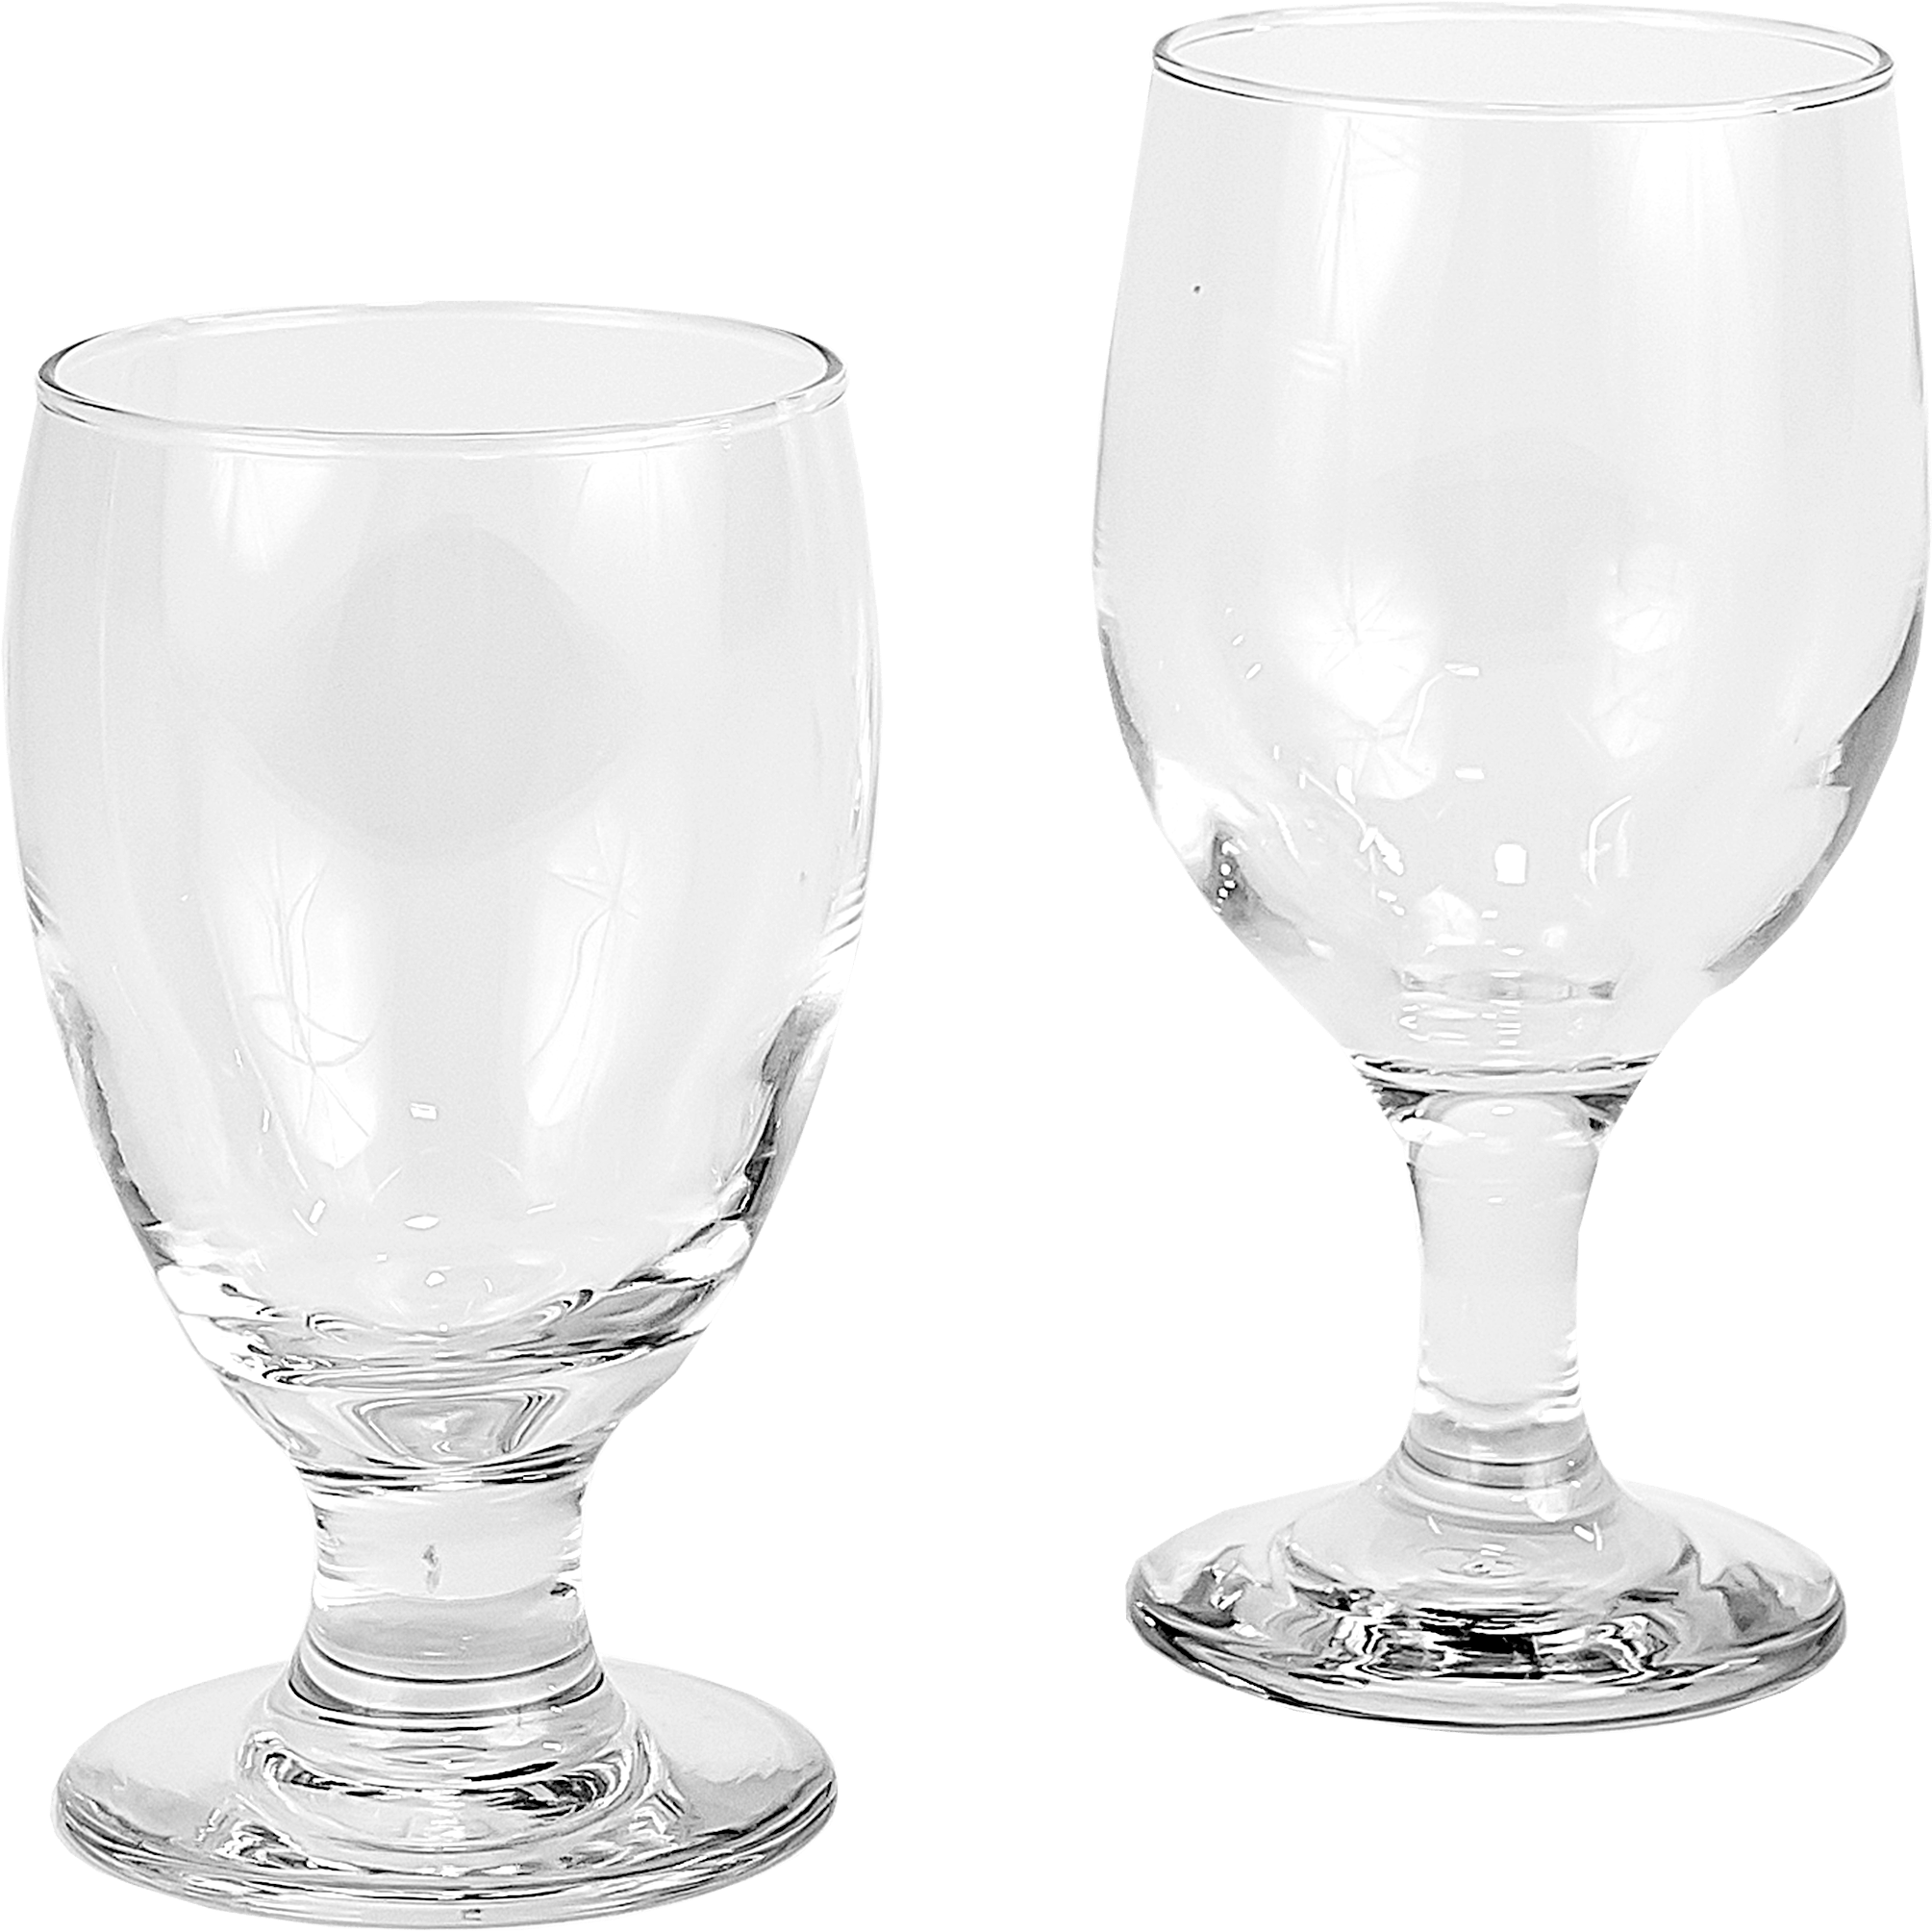 A Pair Of Empty Wine Glasses